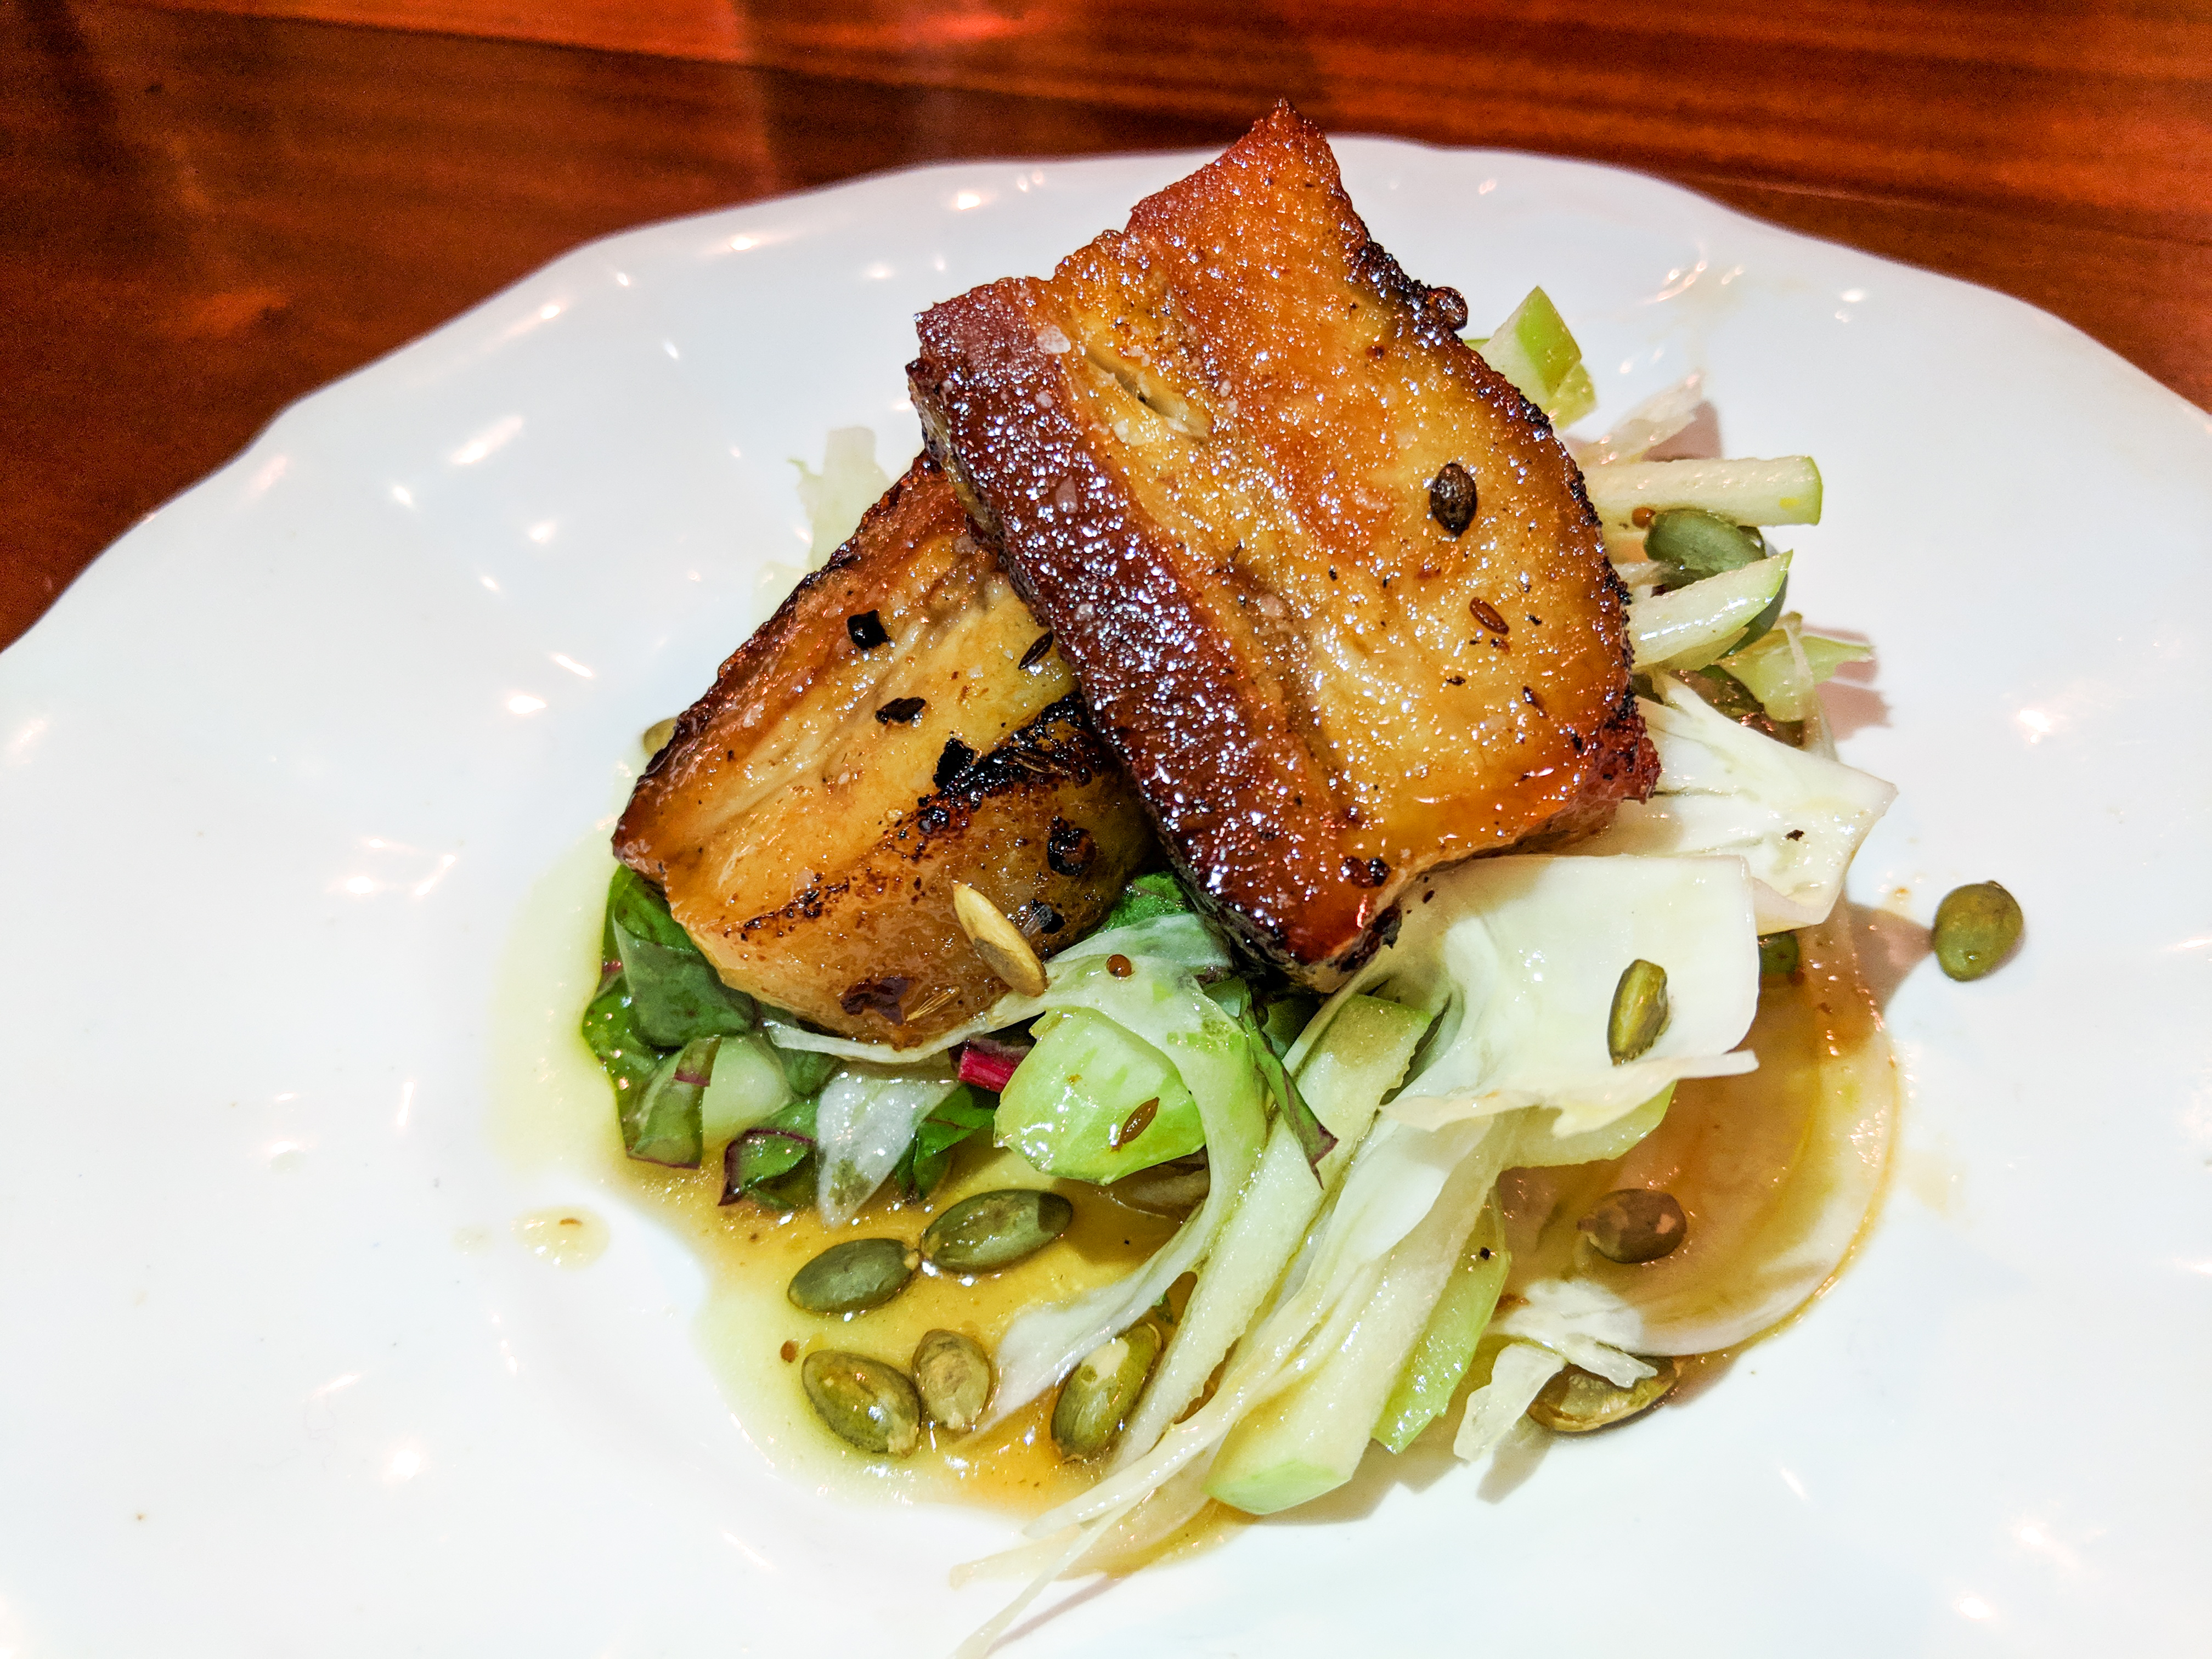 Two slabs of pork belly sit on a white plate with greens and other accoutrements. The plate is on a glossy wood bar.